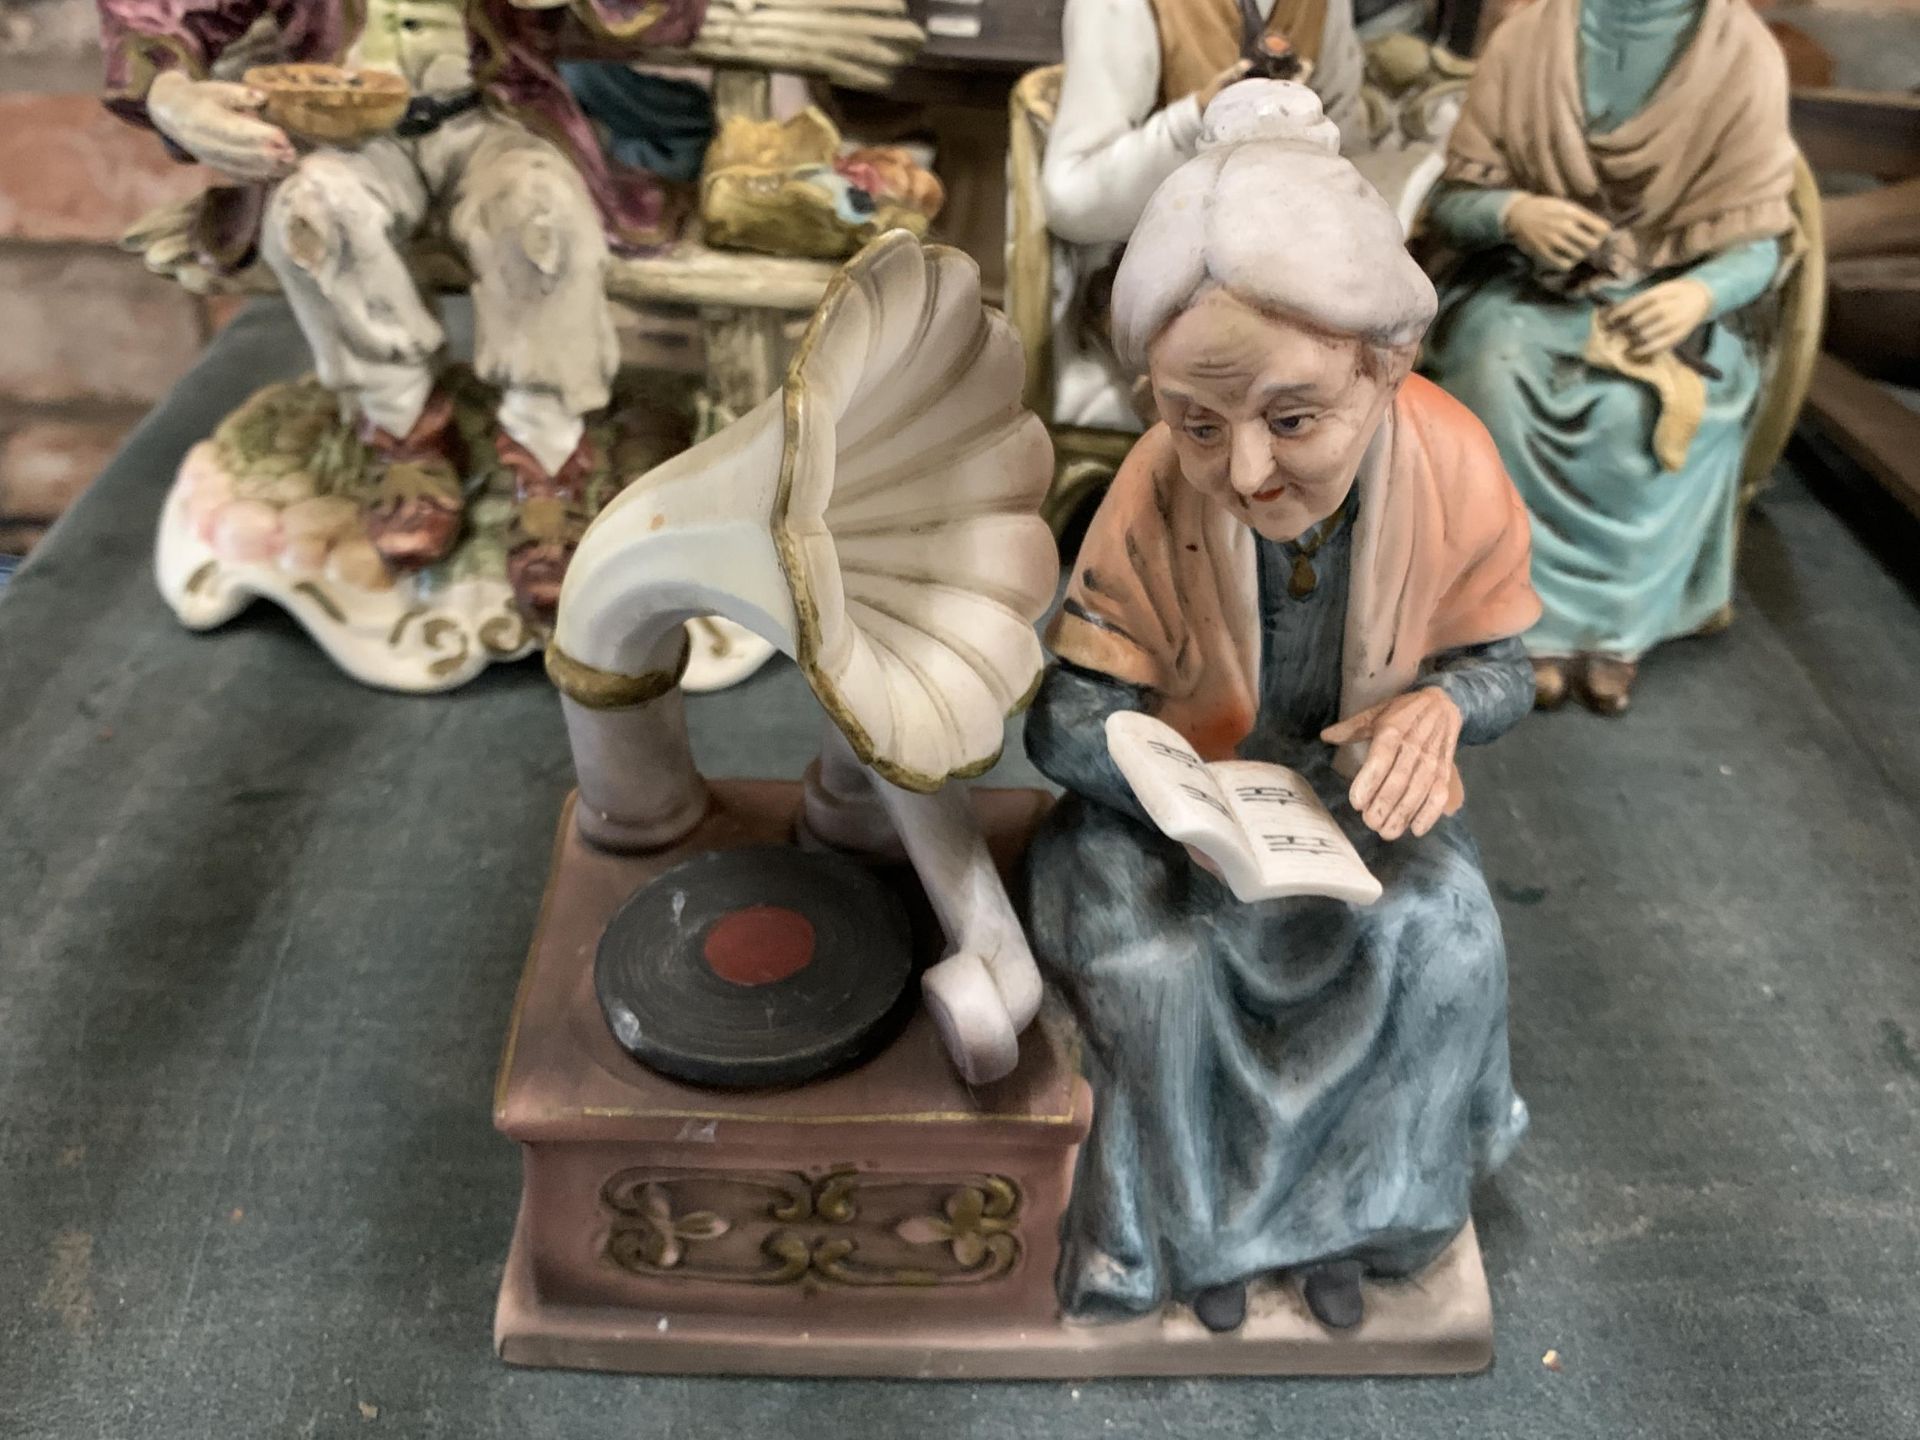 SIX CHALKWARE FIGURINES FEATURING A COUPLE PLAYING CARD GAMES, LADY WITH DONKEY AND CART ETC - Image 2 of 4